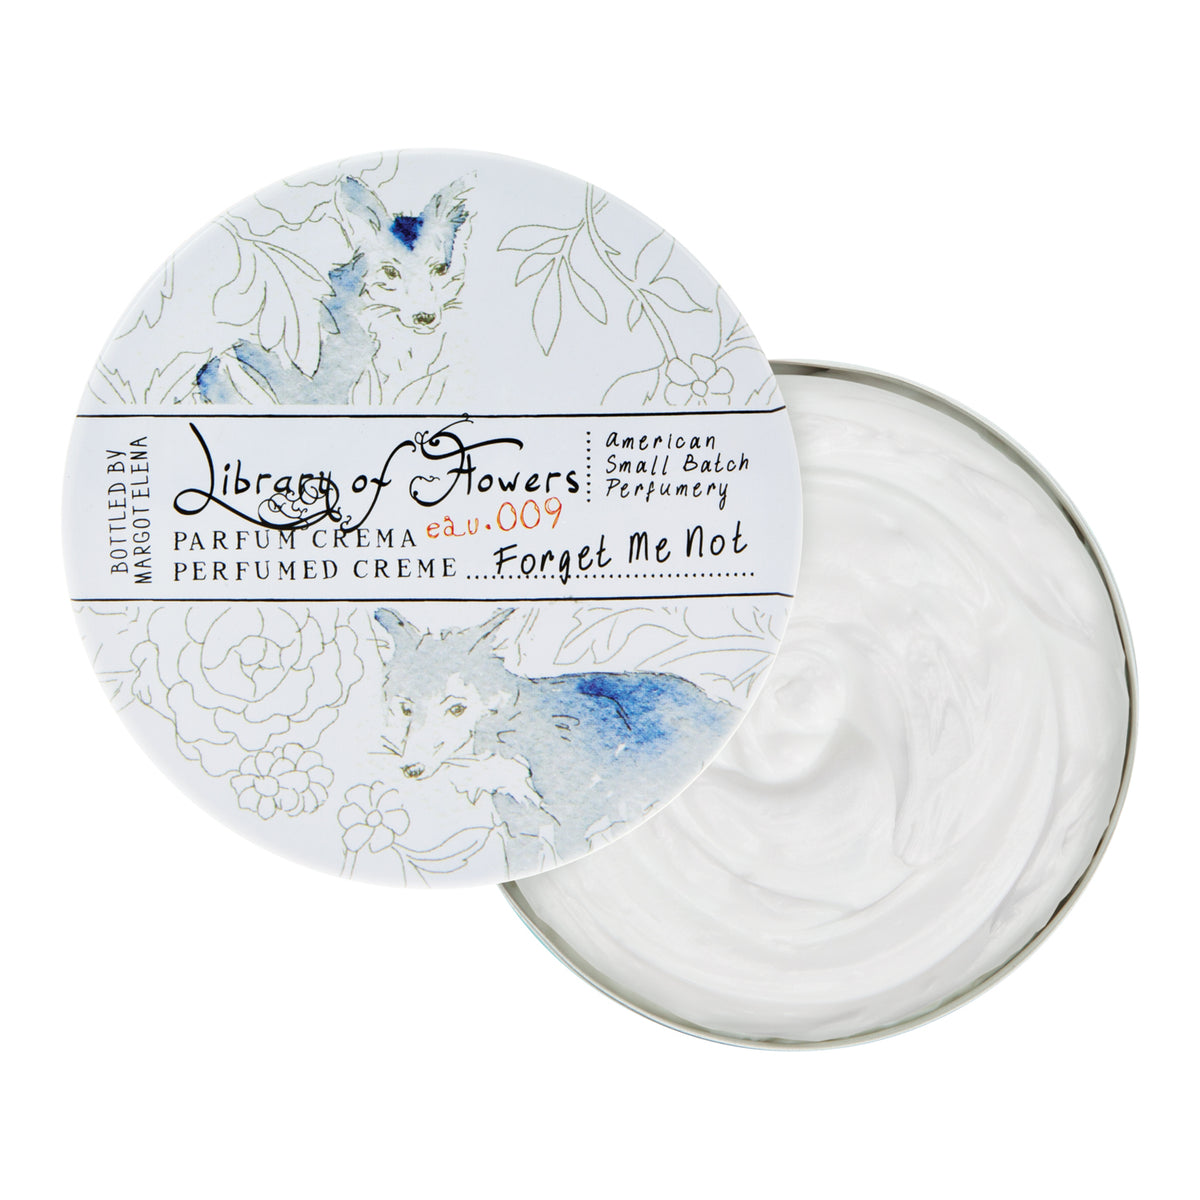 Circular tin of Margot Elena's Library of Flowers Forget Me Not Parfum Crema with a floral design on the lid and open to show the triple-scented white cream inside.